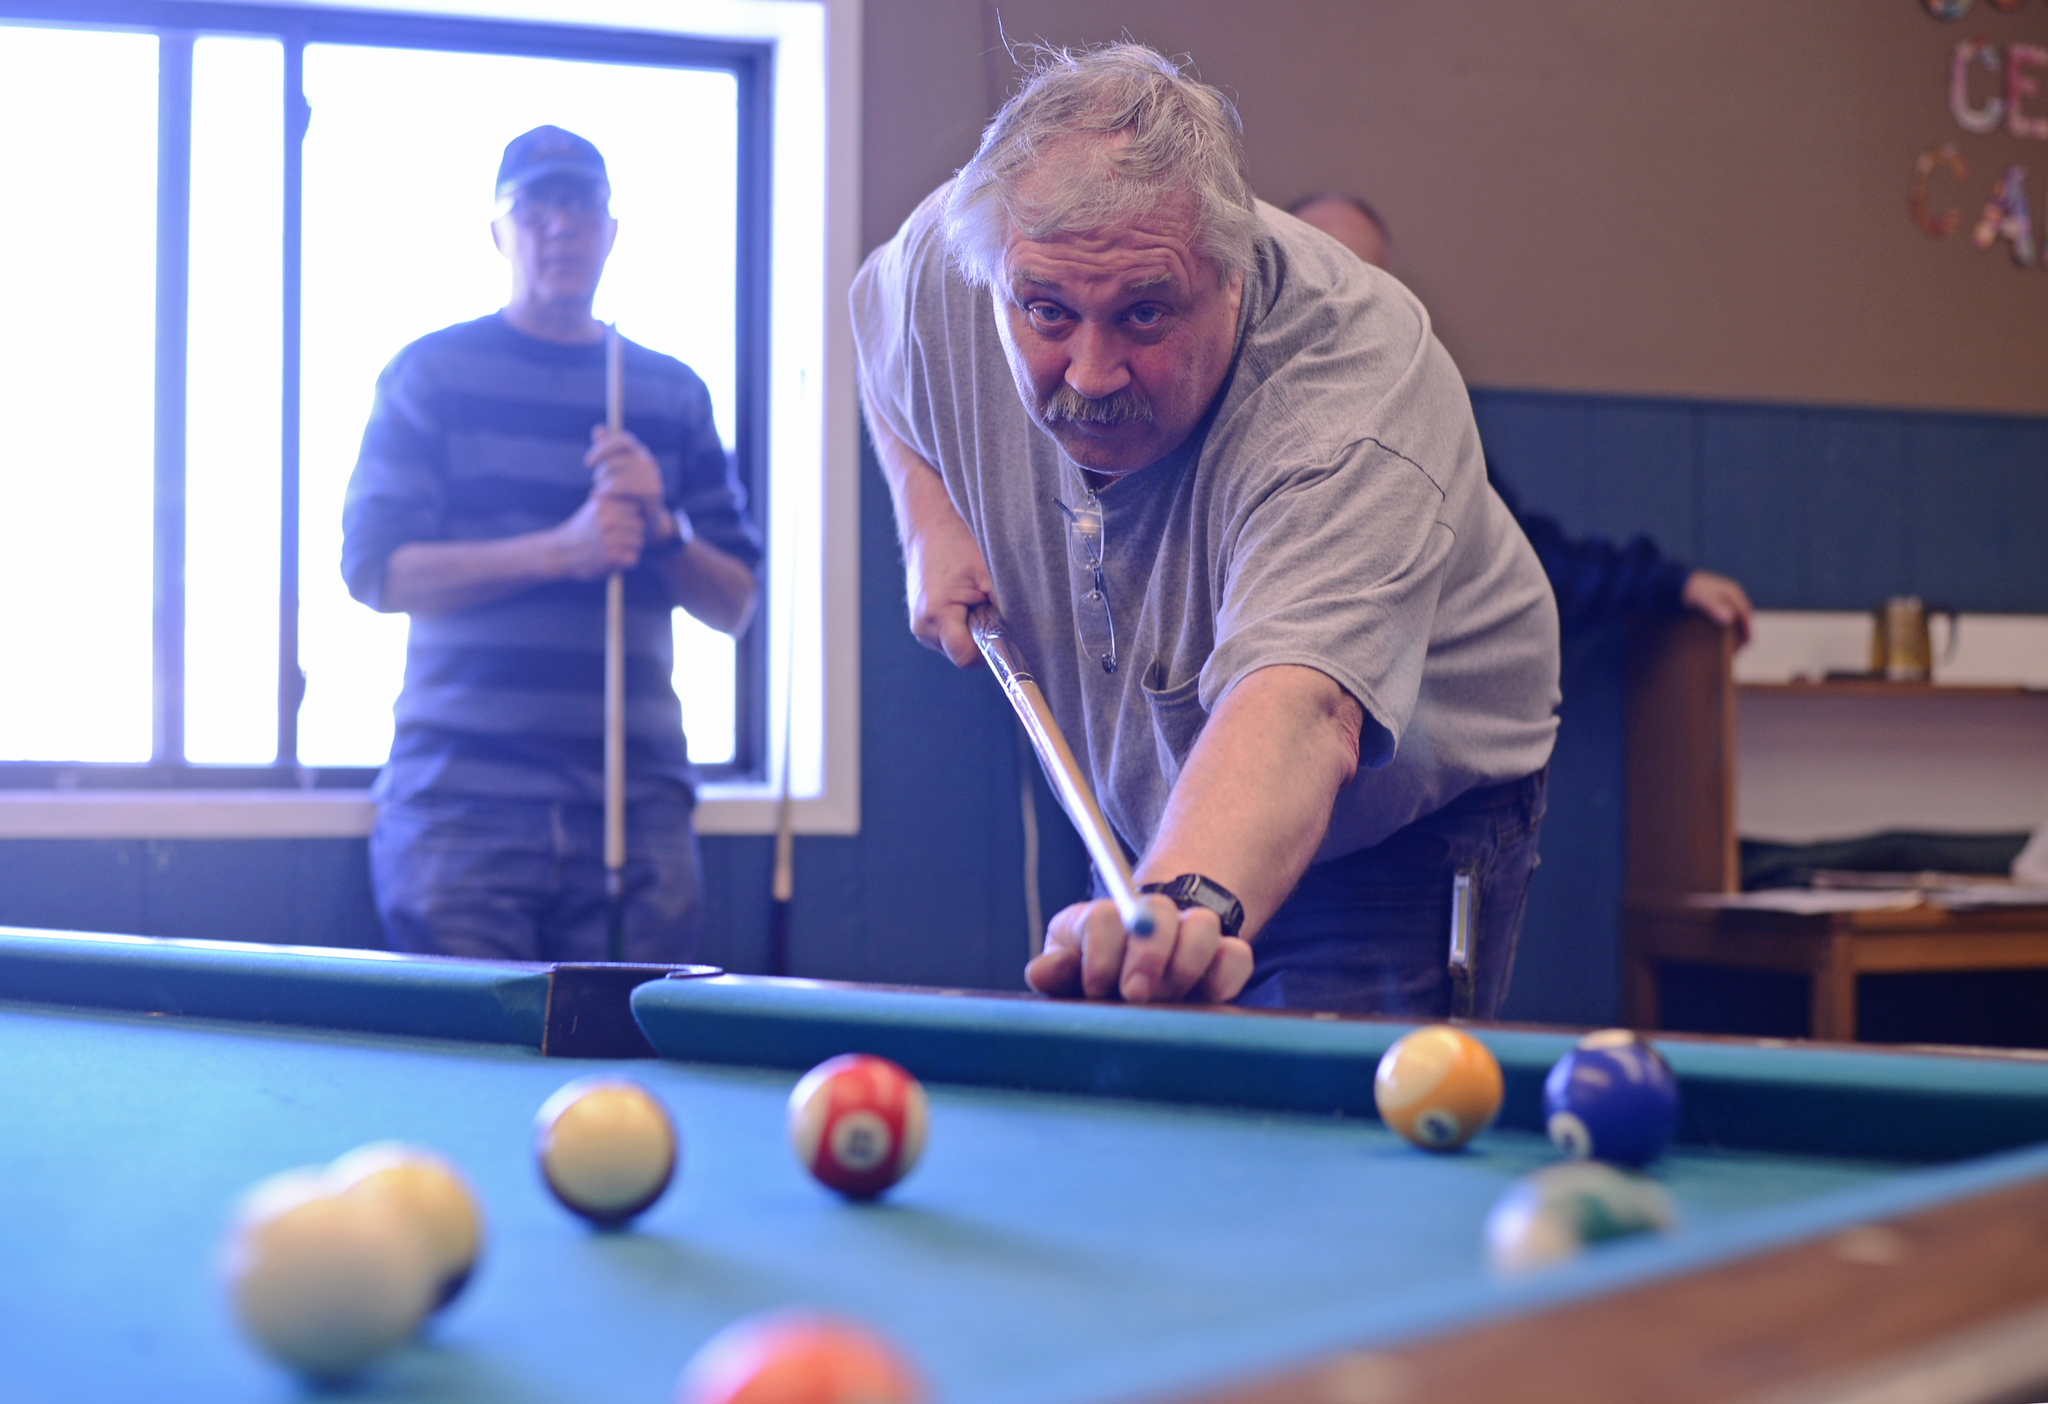 In the final game of the Kenai Senior Olympics pool tournament, Max Pitts watches his shot while his opponent, last year’s champion Ken Losser, rests in the background on Tuesday, Feb. 21, 2017 at the Kenai Teen Center in Kenai, Alaska. Losser won, remaining undefeated in this year’s 8-player double elimination competion, though narrowly — Pitts scratched on the eight ball. The 13th annual Senior Olympics will continue until Saturday with events including poker, pinochle, ping-pong, darts, dominoes, cribbage, basketball, and Wii bowling. (Ben Boettger/Peninsula Clarion)